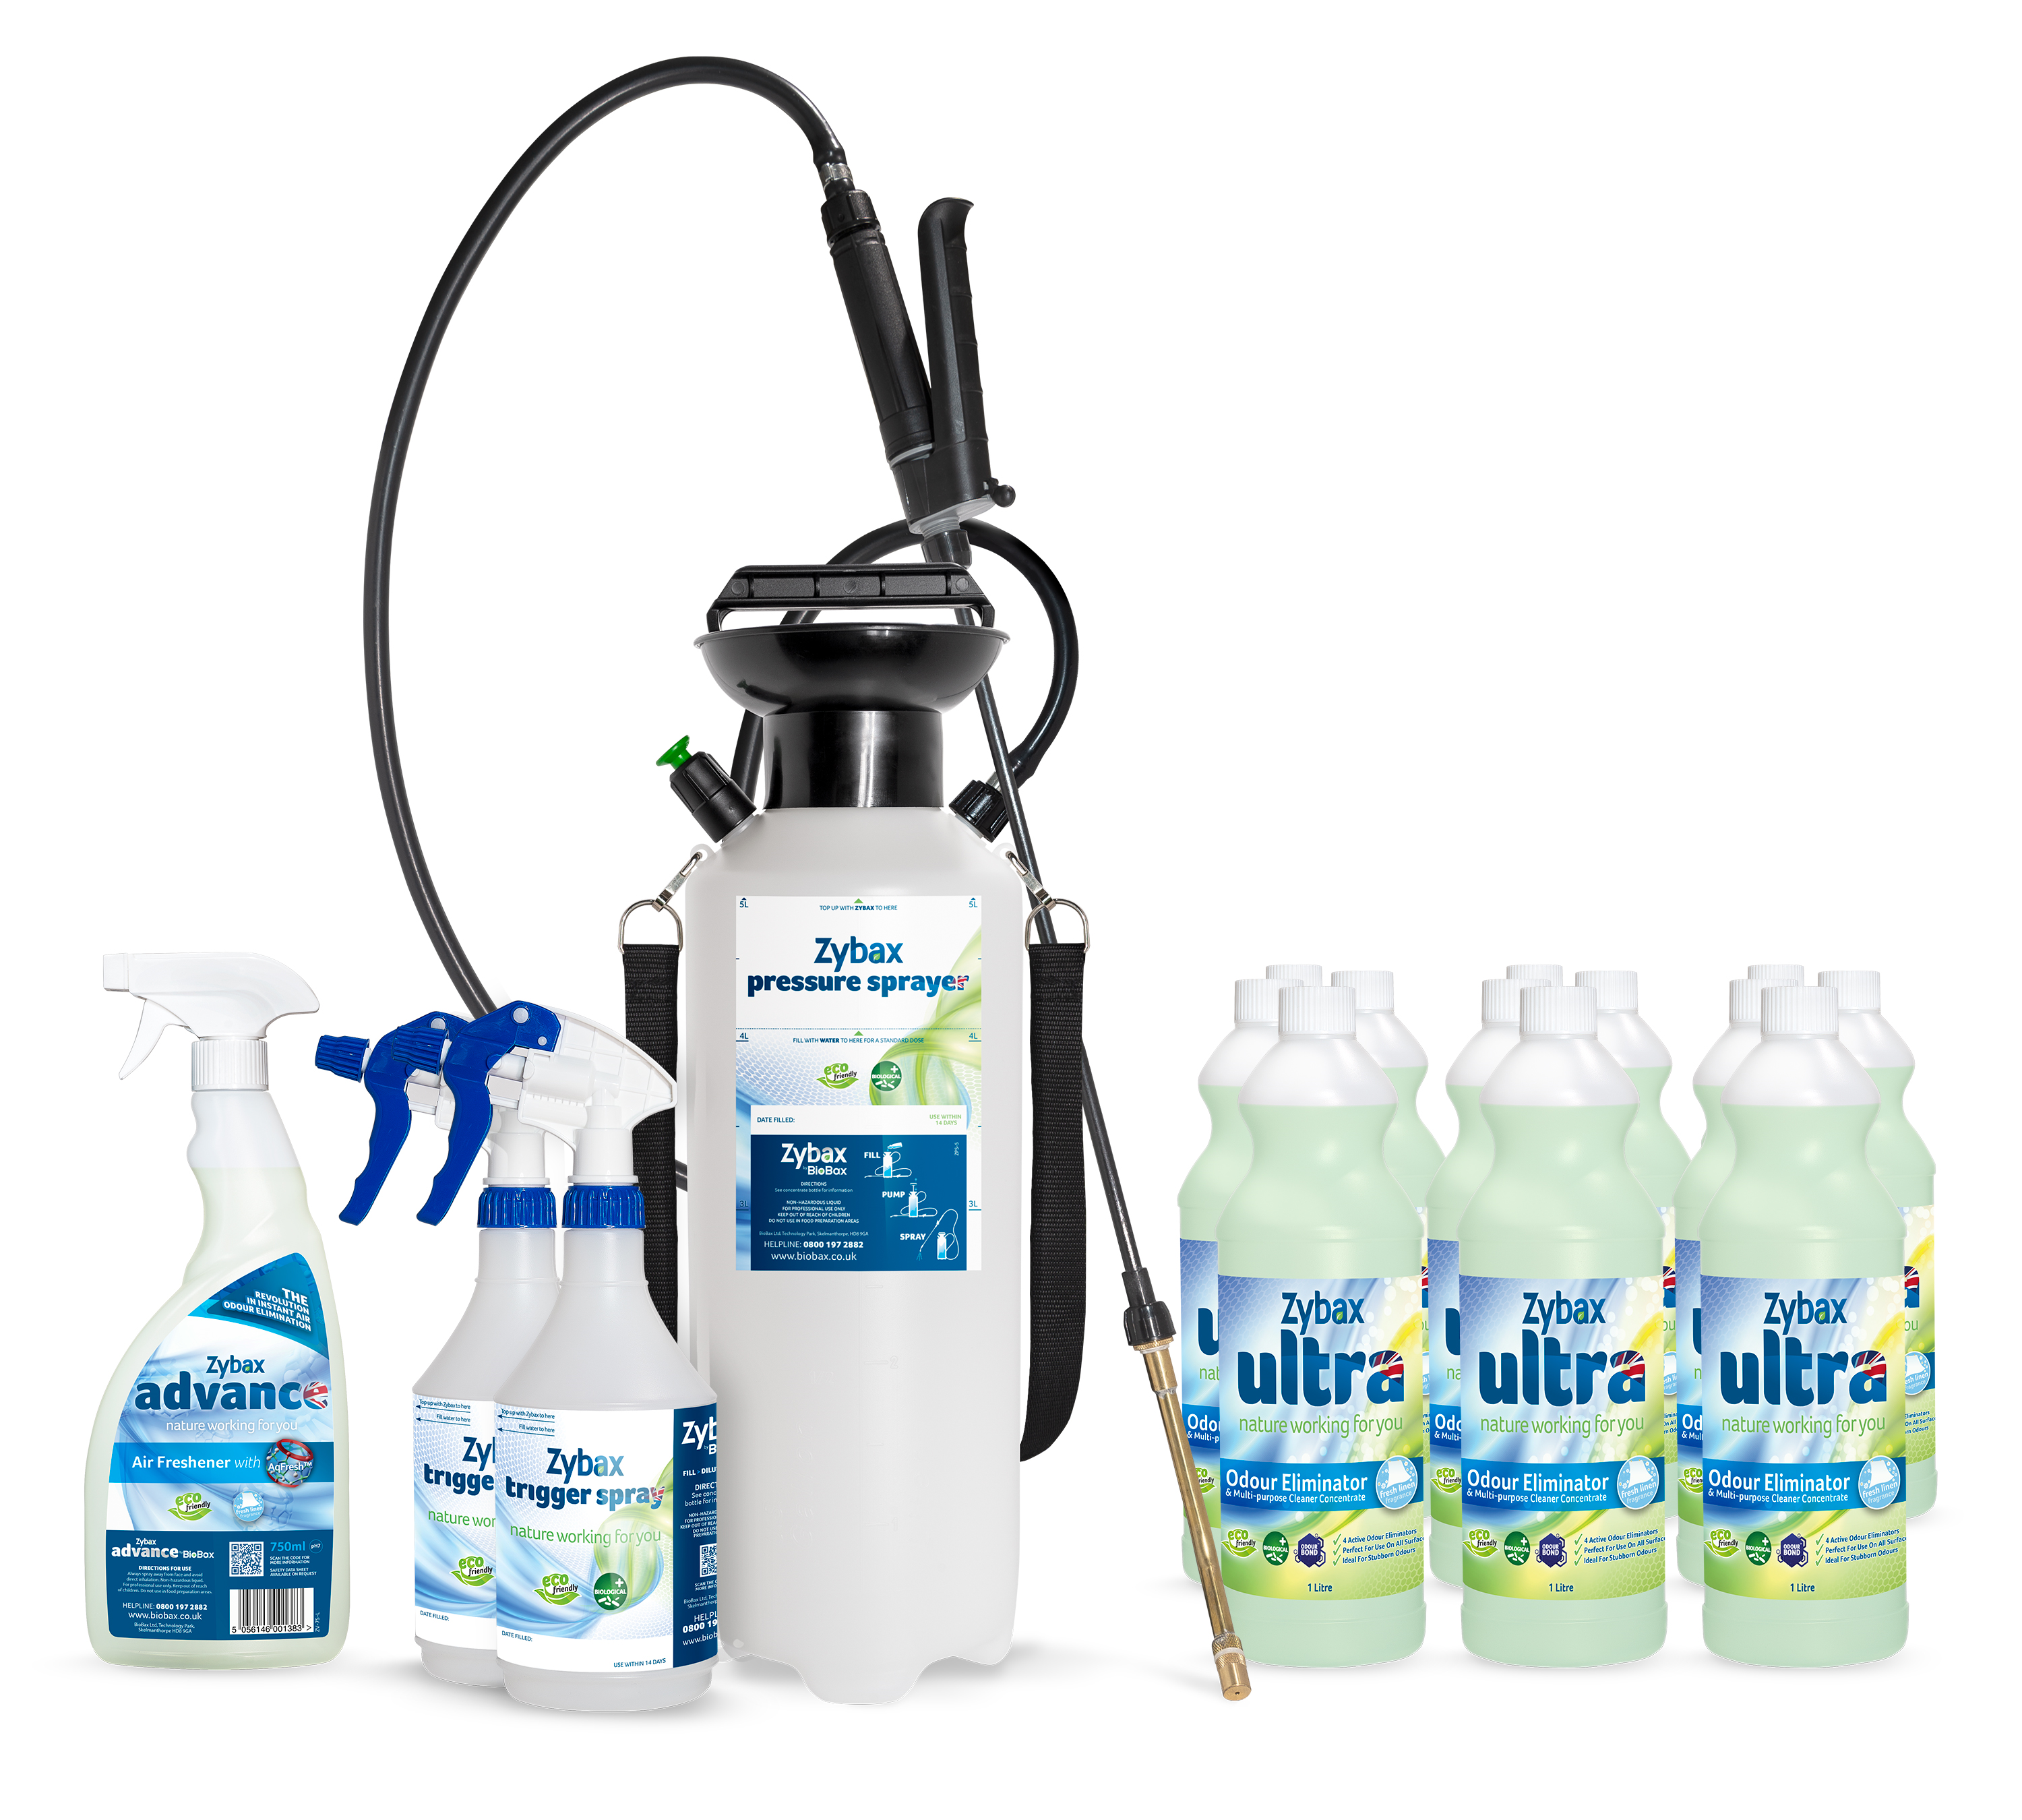 Zybax Professional Starter Kit - Fresh Mint -Contains 12 x 1Litre Zybax Ultra Concentrate , 2 xTrigger Spray Bottles , 1 x 5litre Pressure Sprayer. User Guide Professional Starter Kit - Fresh Mint  -Contains 12 x 1Litre Zybax Ultra Concentrate , 2 xTrigge